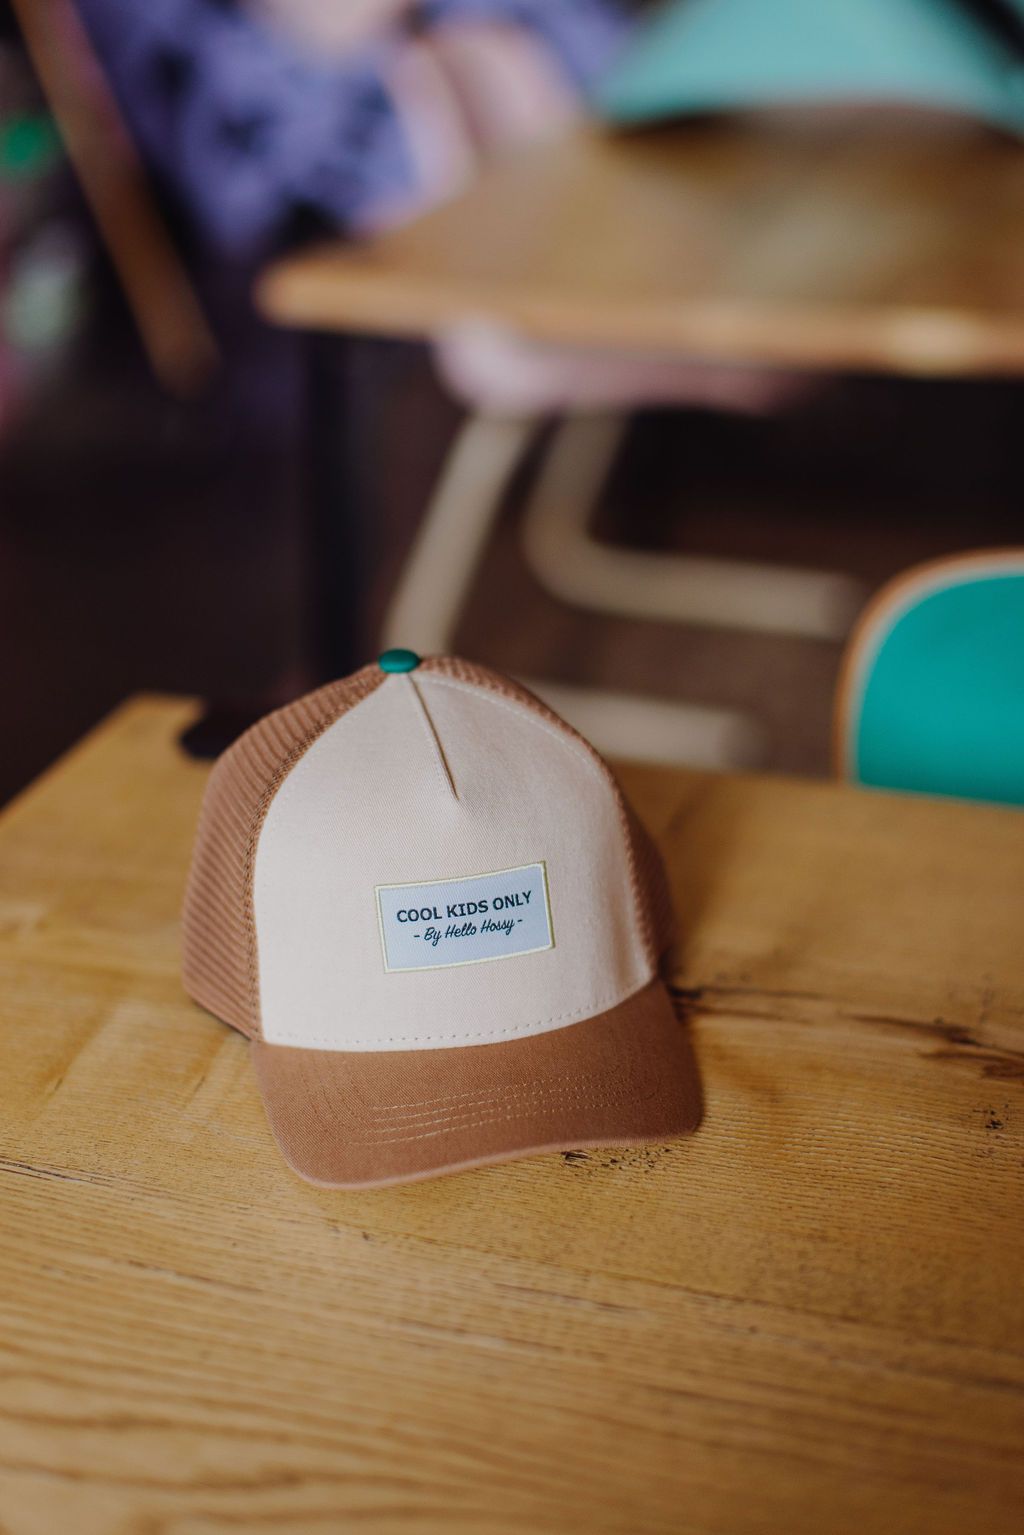 Casquette Mini Iced Coffee 2-5 ans - Cool kids Only - Hello Hossy